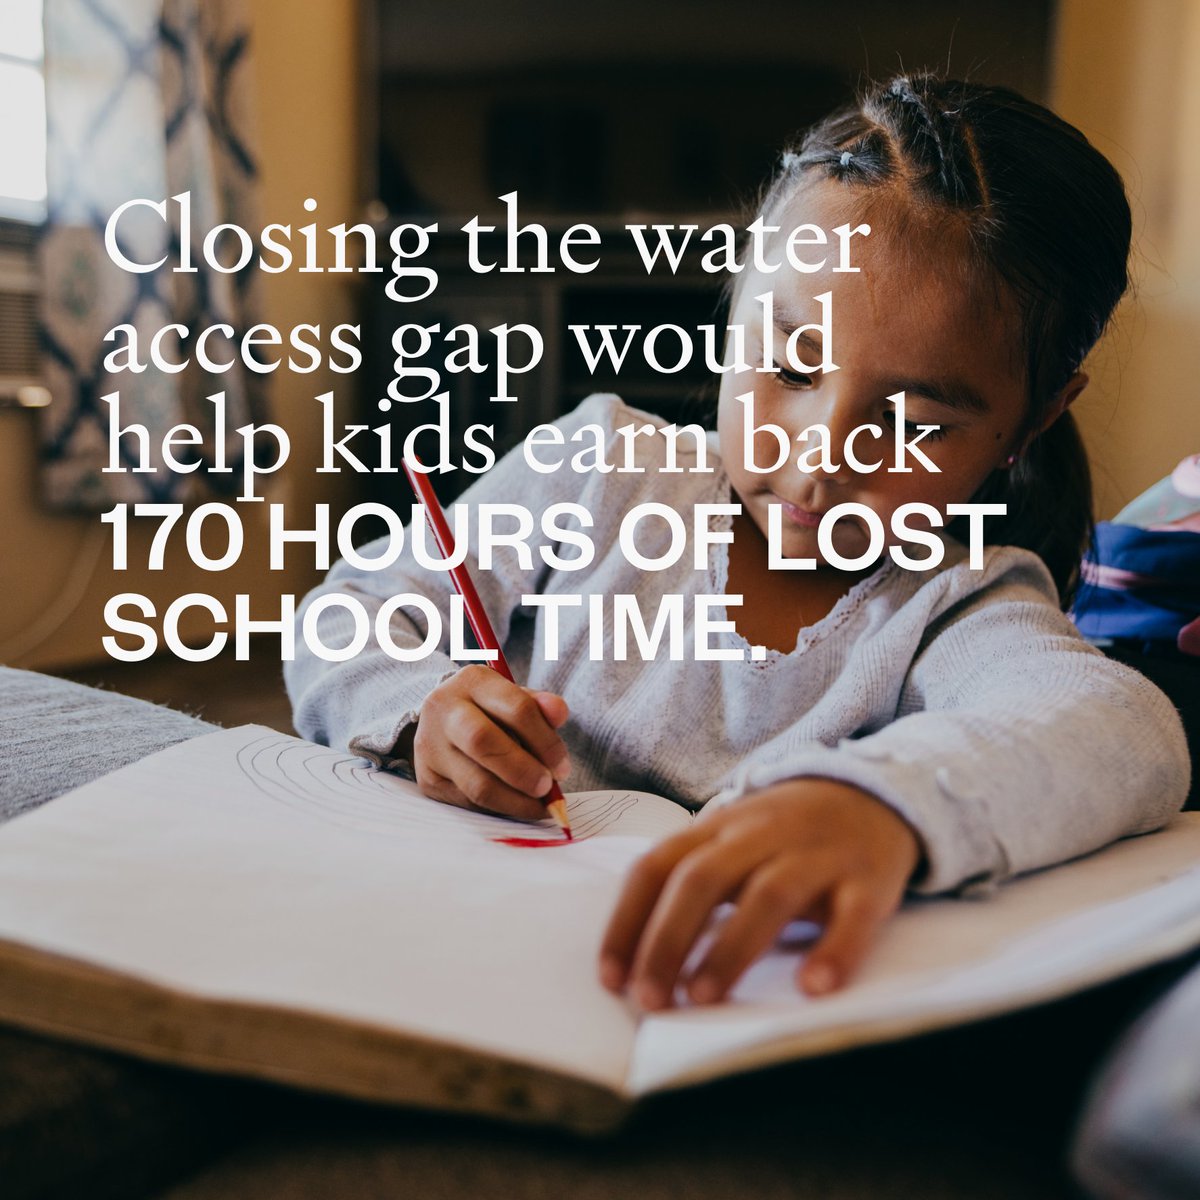 Children lose time from school, homework, and play when they have to help haul water home. Closing the water access gap could give back 170 hours of missed school time to each child. Learn more about the water access gap and what we're doing to close it: digdeep.org/draining